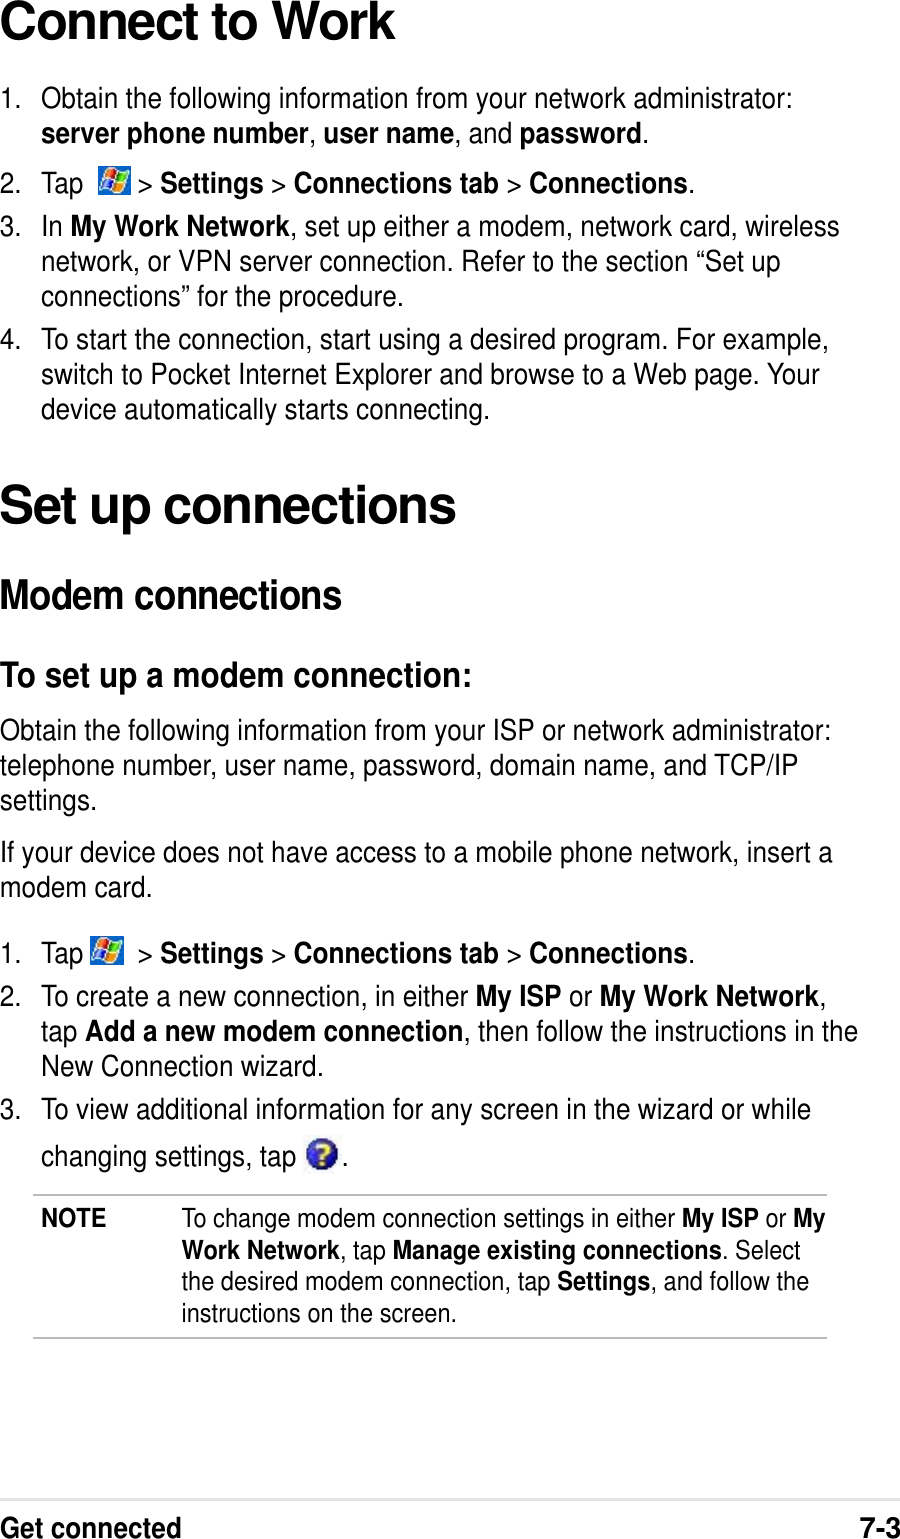 Get connected7-3Connect to Work1. Obtain the following information from your network administrator:server phone number, user name, and password.2. Tap    &gt; Settings &gt; Connections tab &gt; Connections.3. In My Work Network, set up either a modem, network card, wirelessnetwork, or VPN server connection. Refer to the section “Set upconnections” for the procedure.4. To start the connection, start using a desired program. For example,switch to Pocket Internet Explorer and browse to a Web page. Yourdevice automatically starts connecting.Set up connectionsModem connectionsTo set up a modem connection:Obtain the following information from your ISP or network administrator:telephone number, user name, password, domain name, and TCP/IPsettings.If your device does not have access to a mobile phone network, insert amodem card.1. Tap    &gt; Settings &gt; Connections tab &gt; Connections.2. To create a new connection, in either My ISP or My Work Network,tap Add a new modem connection, then follow the instructions in theNew Connection wizard.3. To view additional information for any screen in the wizard or whilechanging settings, tap  .NOTE To change modem connection settings in either My ISP or MyWork Network, tap Manage existing connections. Selectthe desired modem connection, tap Settings, and follow theinstructions on the screen.